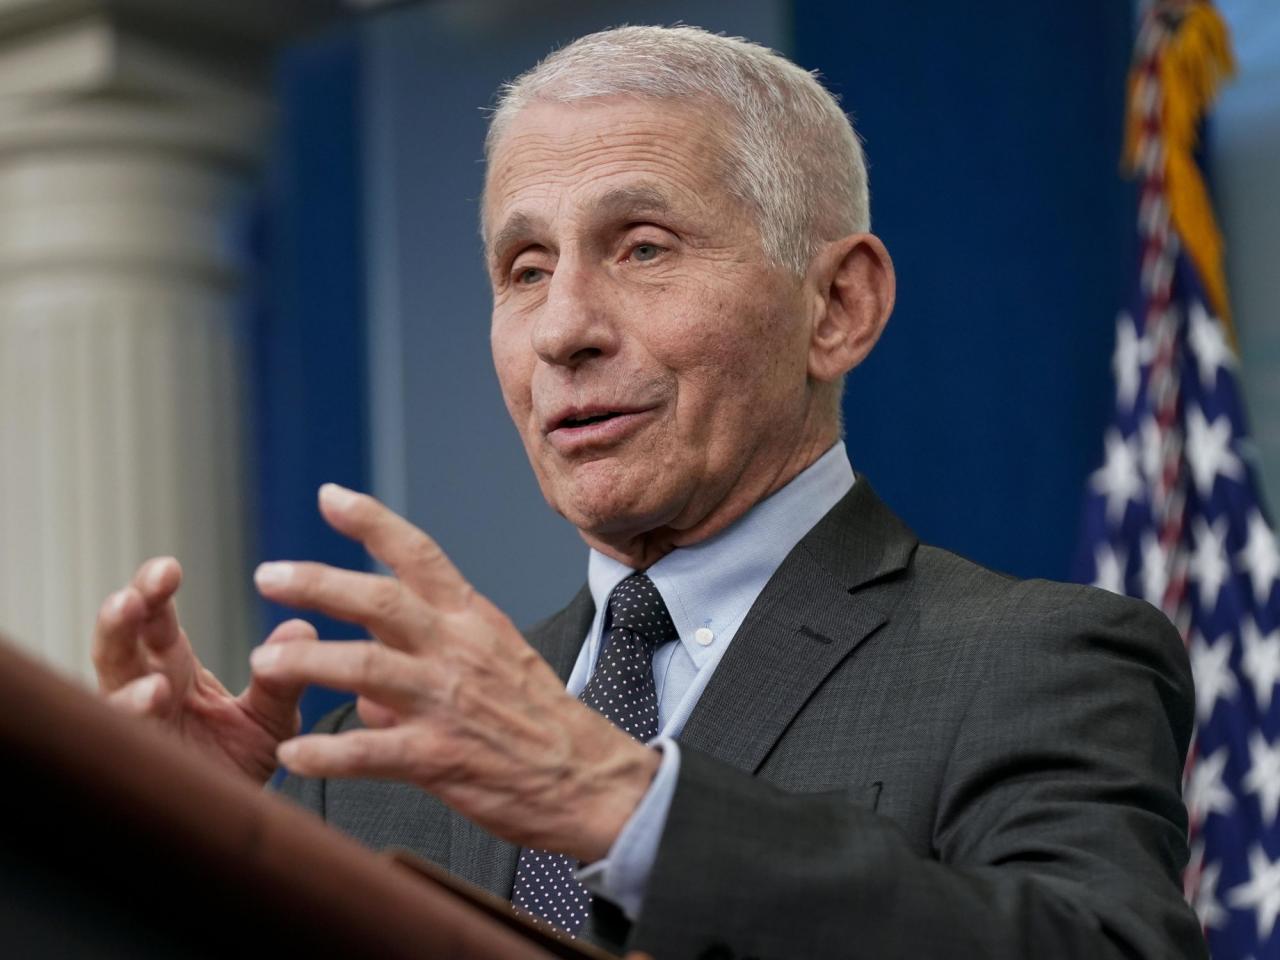 In June, Anthony Fauci will release 'On Call', a reflection on his extensive career in government.